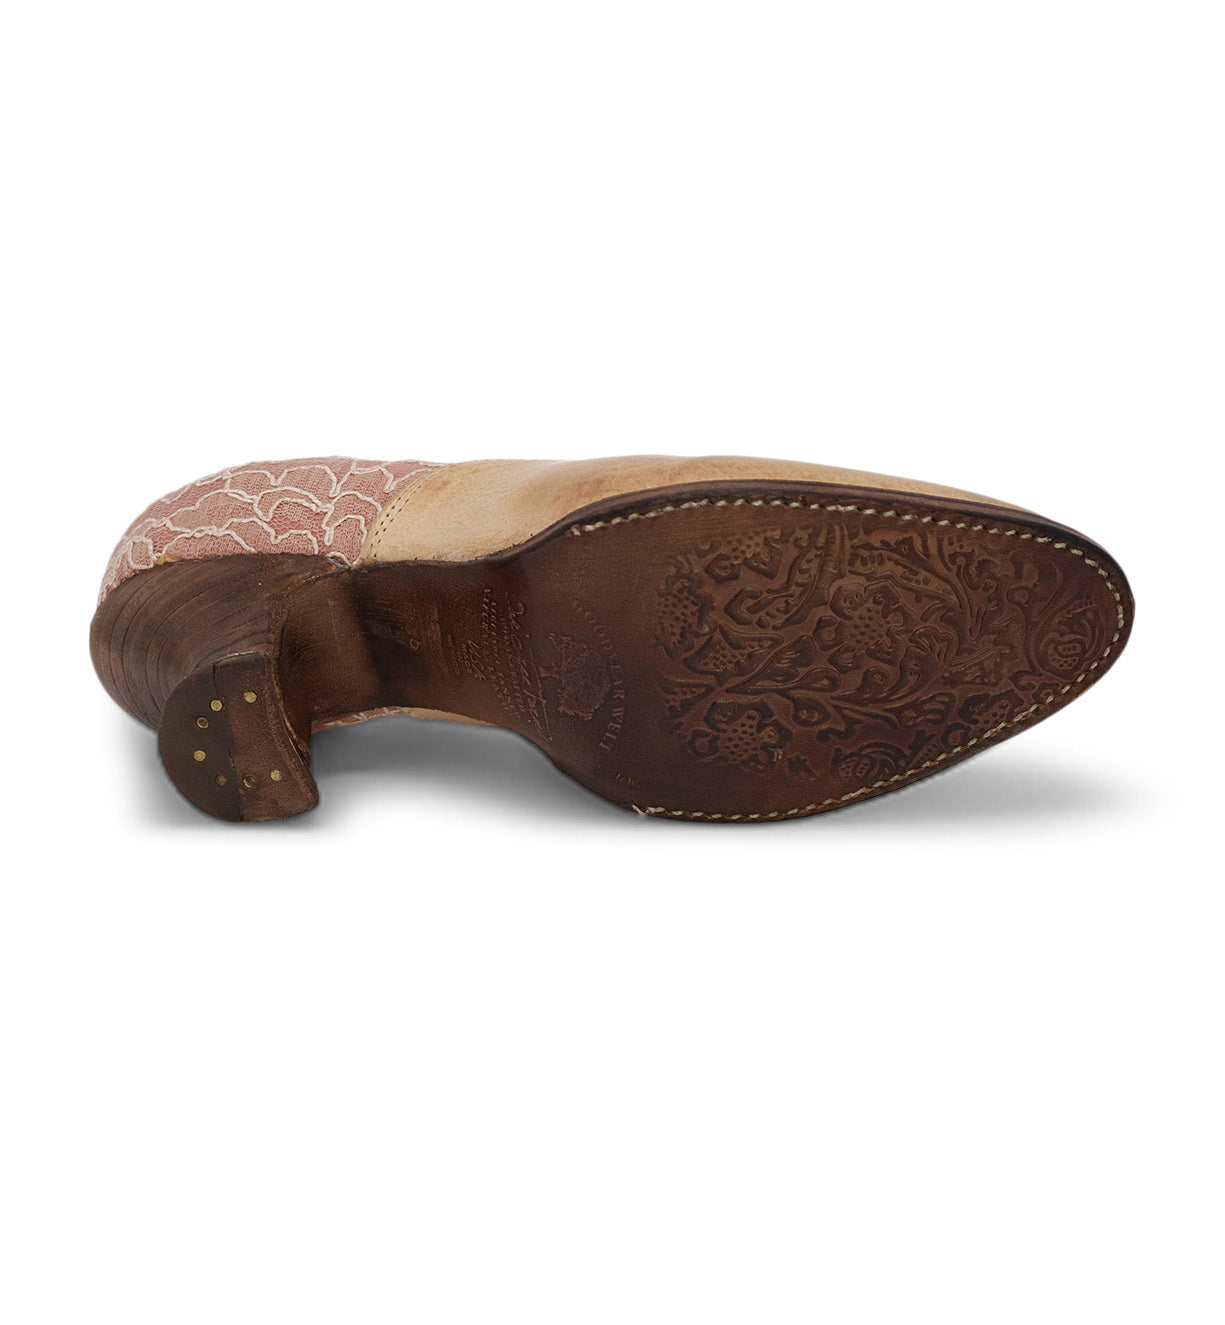 A Janet shoe from Oak Tree Farms with a floral pattern, featuring a lace-up front for a neutral look.